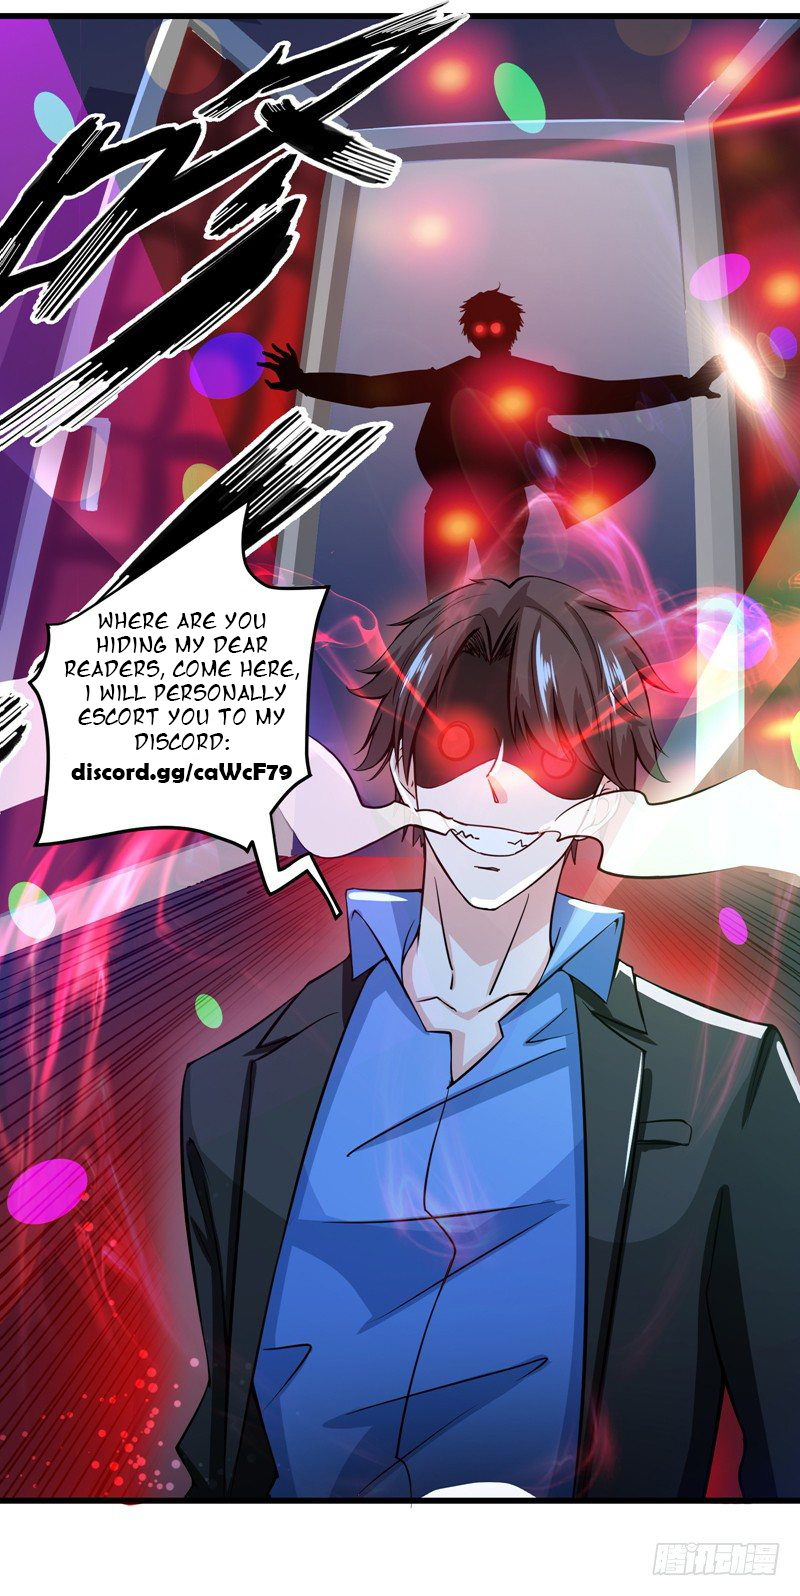 Peerless Doctor in the City Ch. 28